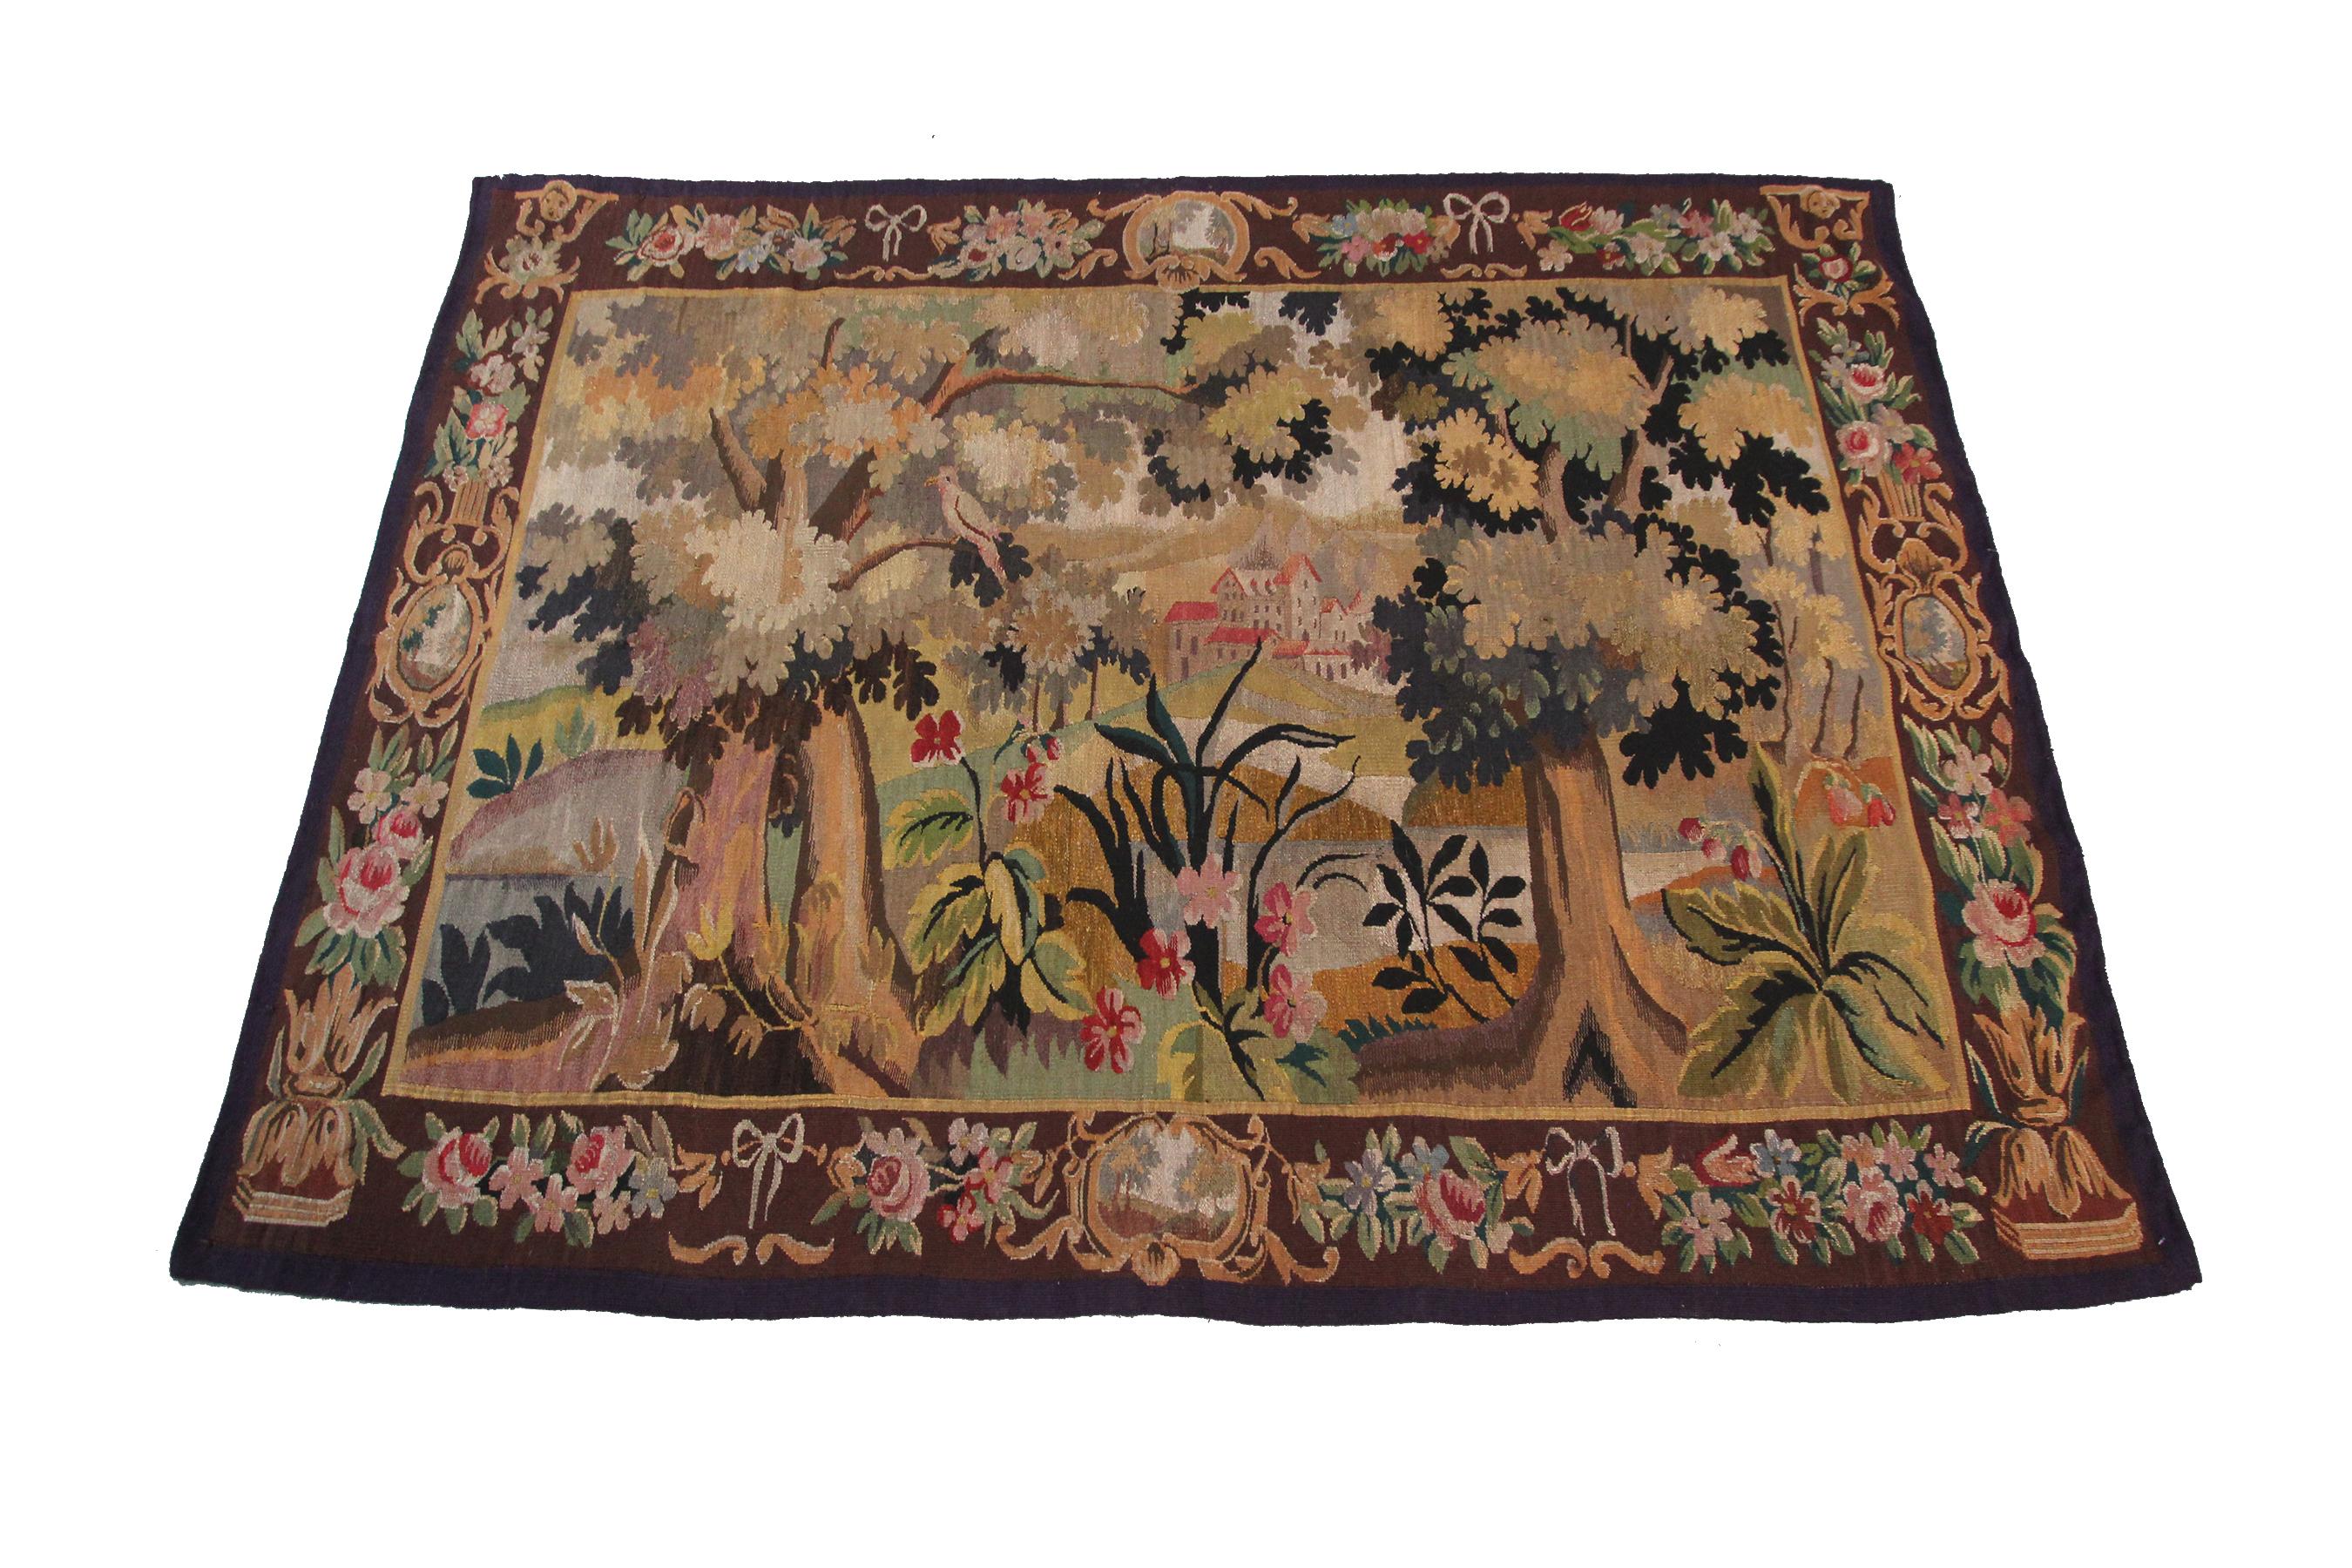 Antique Verdure Tapestry French Tapestry Handmade Antique Large Tapestry 1900

Measures: 5.4